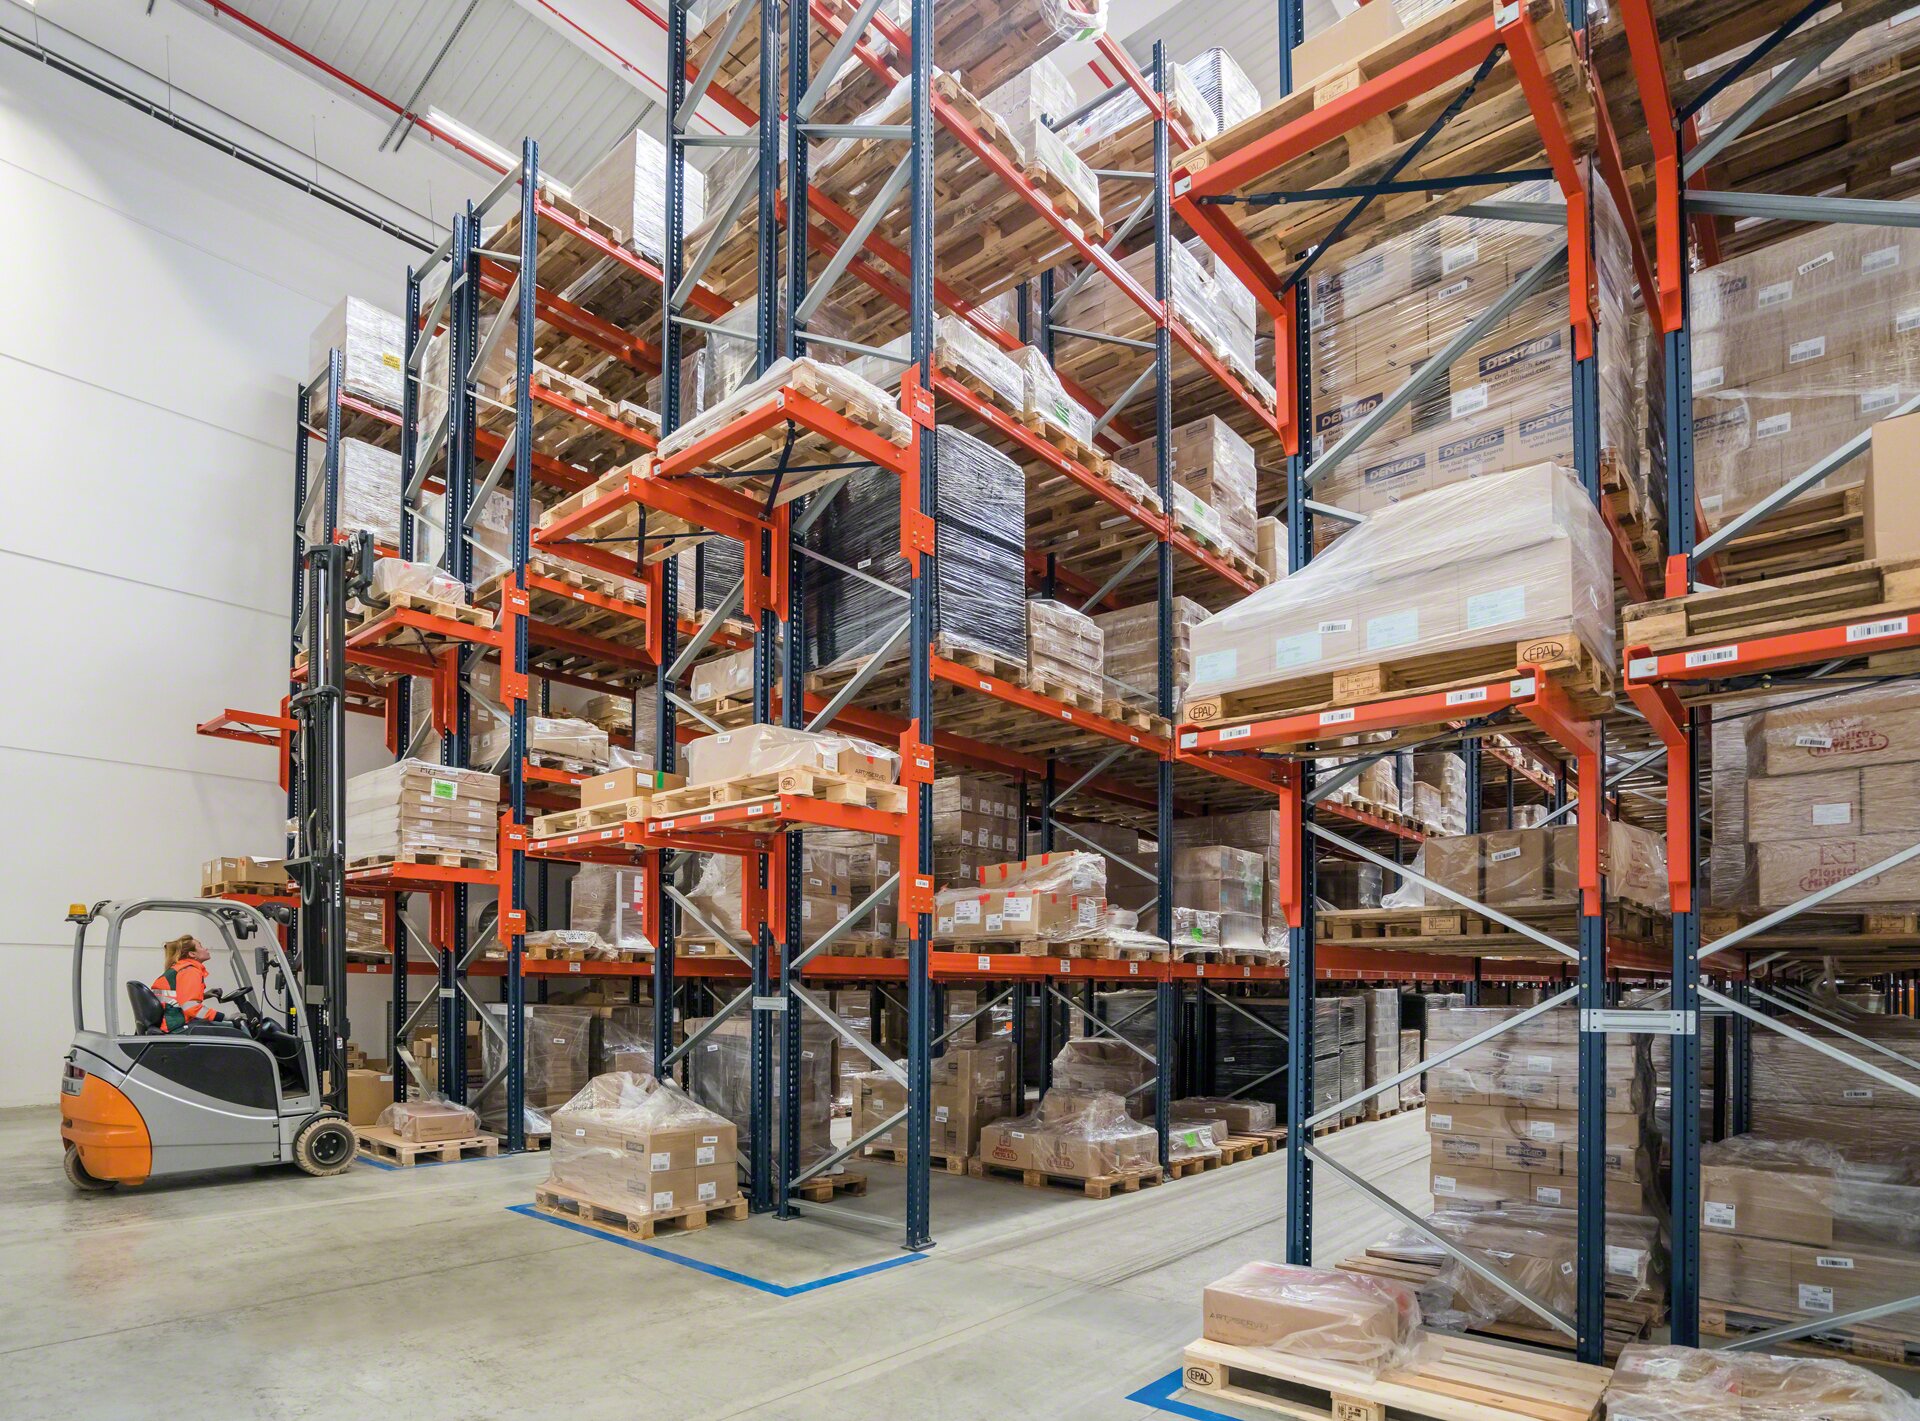 Pick and deposit (P&D) stations, located on the ends of the racking units, streamline the flow of goods